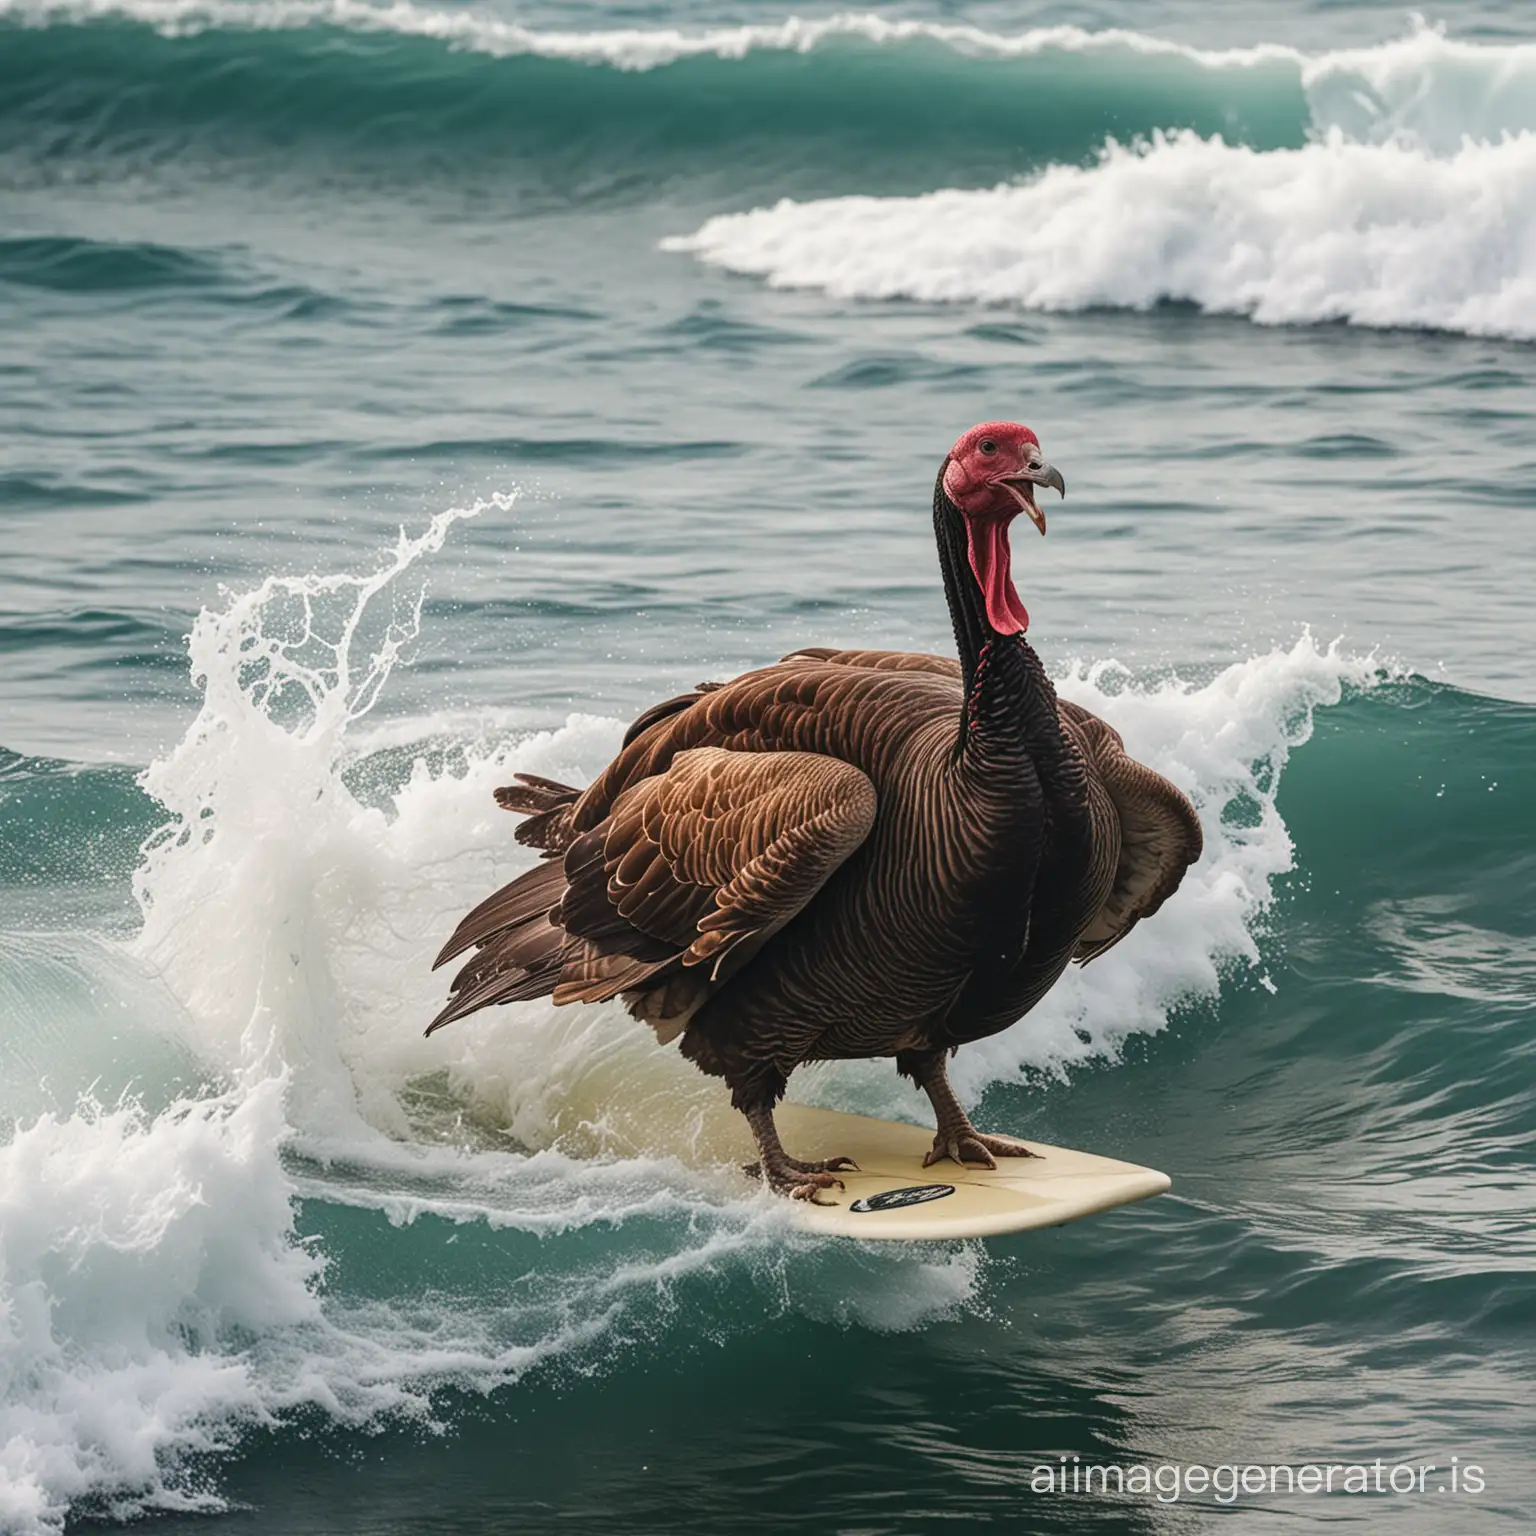 a photo of a turkey surfing in the ocean